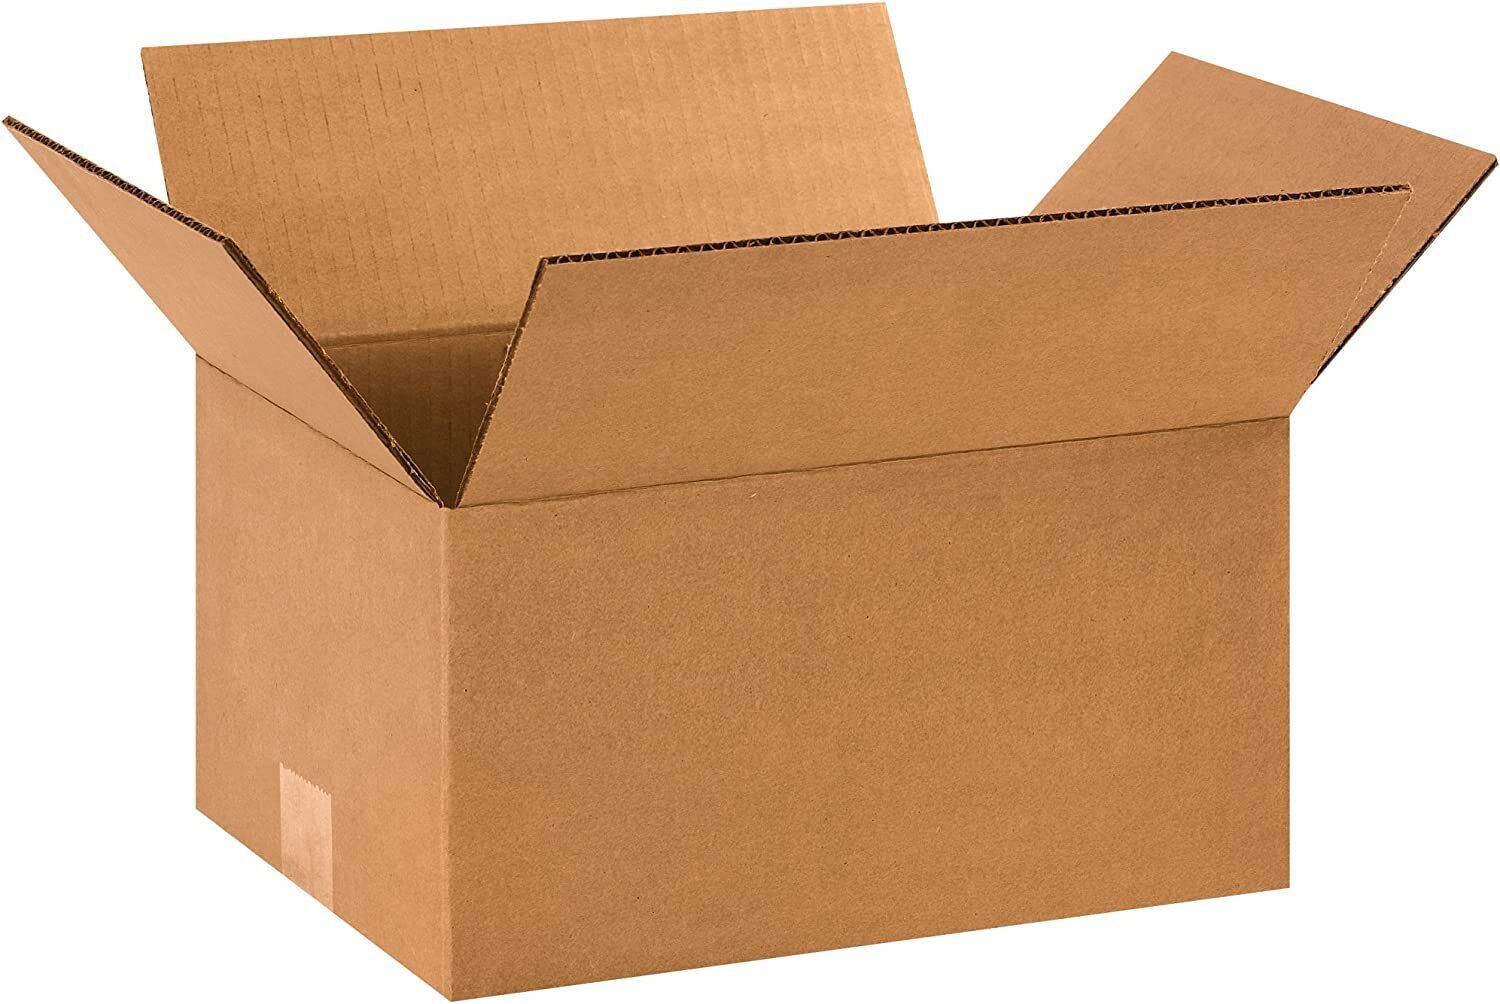 Corrugated Shipping Boxes Cardboard Paper Boxes Shipping Box Corrugated (25 Ct.)